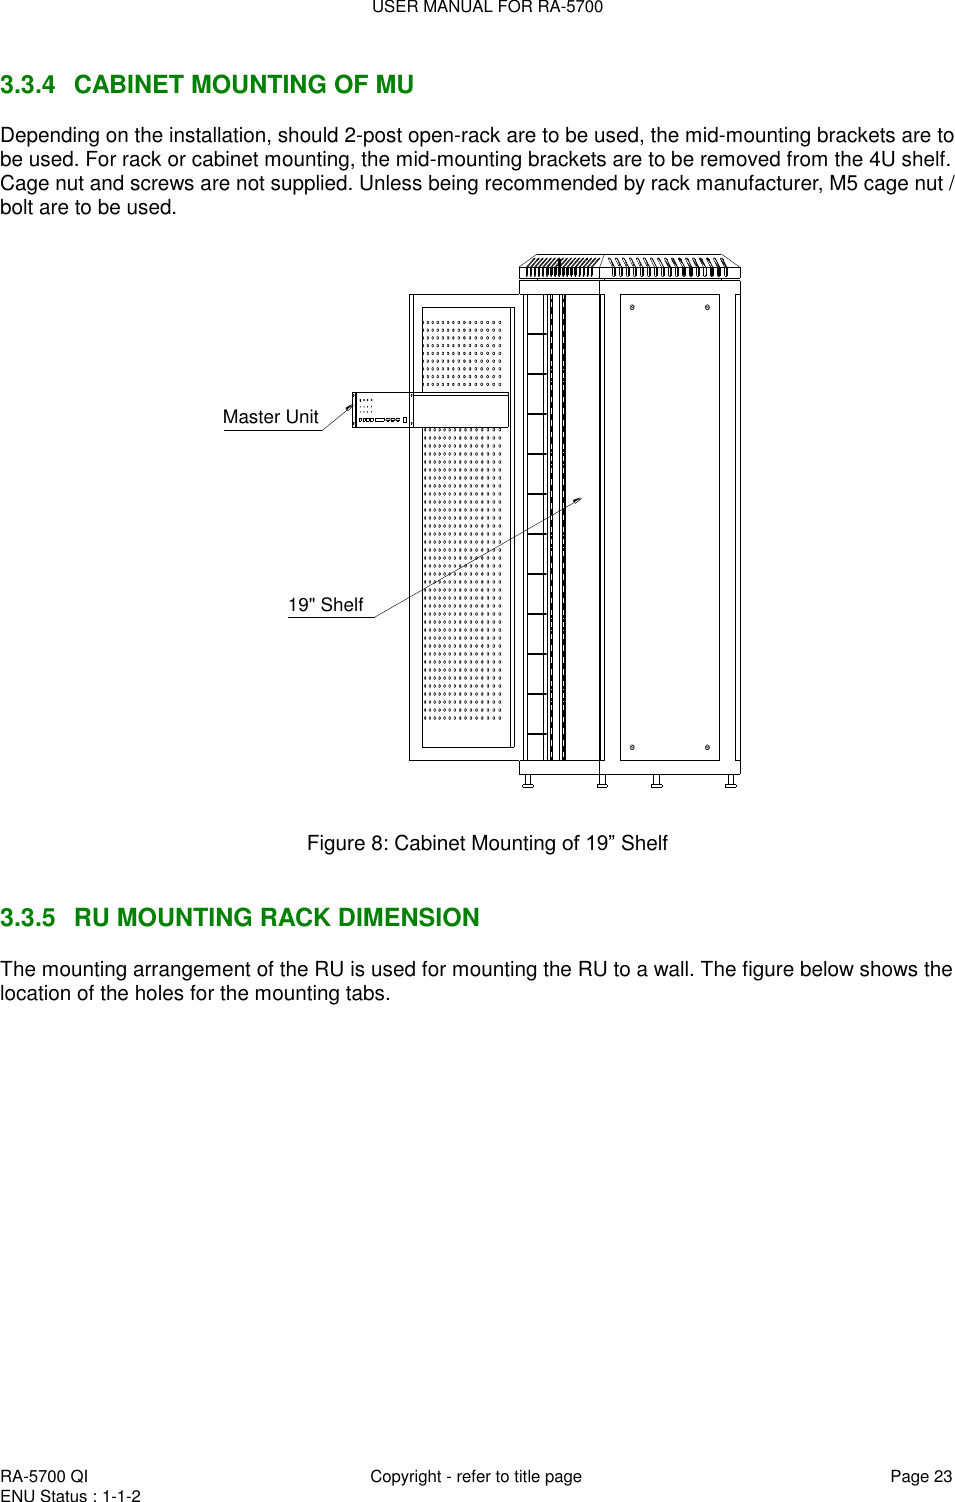 USER MANUAL FOR RA-5700  RA-5700 QI  Copyright - refer to title page Page 23 ENU Status : 1-1-2    3.3.4  CABINET MOUNTING OF MU Depending on the installation, should 2-post open-rack are to be used, the mid-mounting brackets are to be used. For rack or cabinet mounting, the mid-mounting brackets are to be removed from the 4U shelf. Cage nut and screws are not supplied. Unless being recommended by rack manufacturer, M5 cage nut / bolt are to be used.  Master Unit19&quot; Shelf  Figure 8: Cabinet Mounting of 19” Shelf   3.3.5  RU MOUNTING RACK DIMENSION The mounting arrangement of the RU is used for mounting the RU to a wall. The figure below shows the location of the holes for the mounting tabs.  